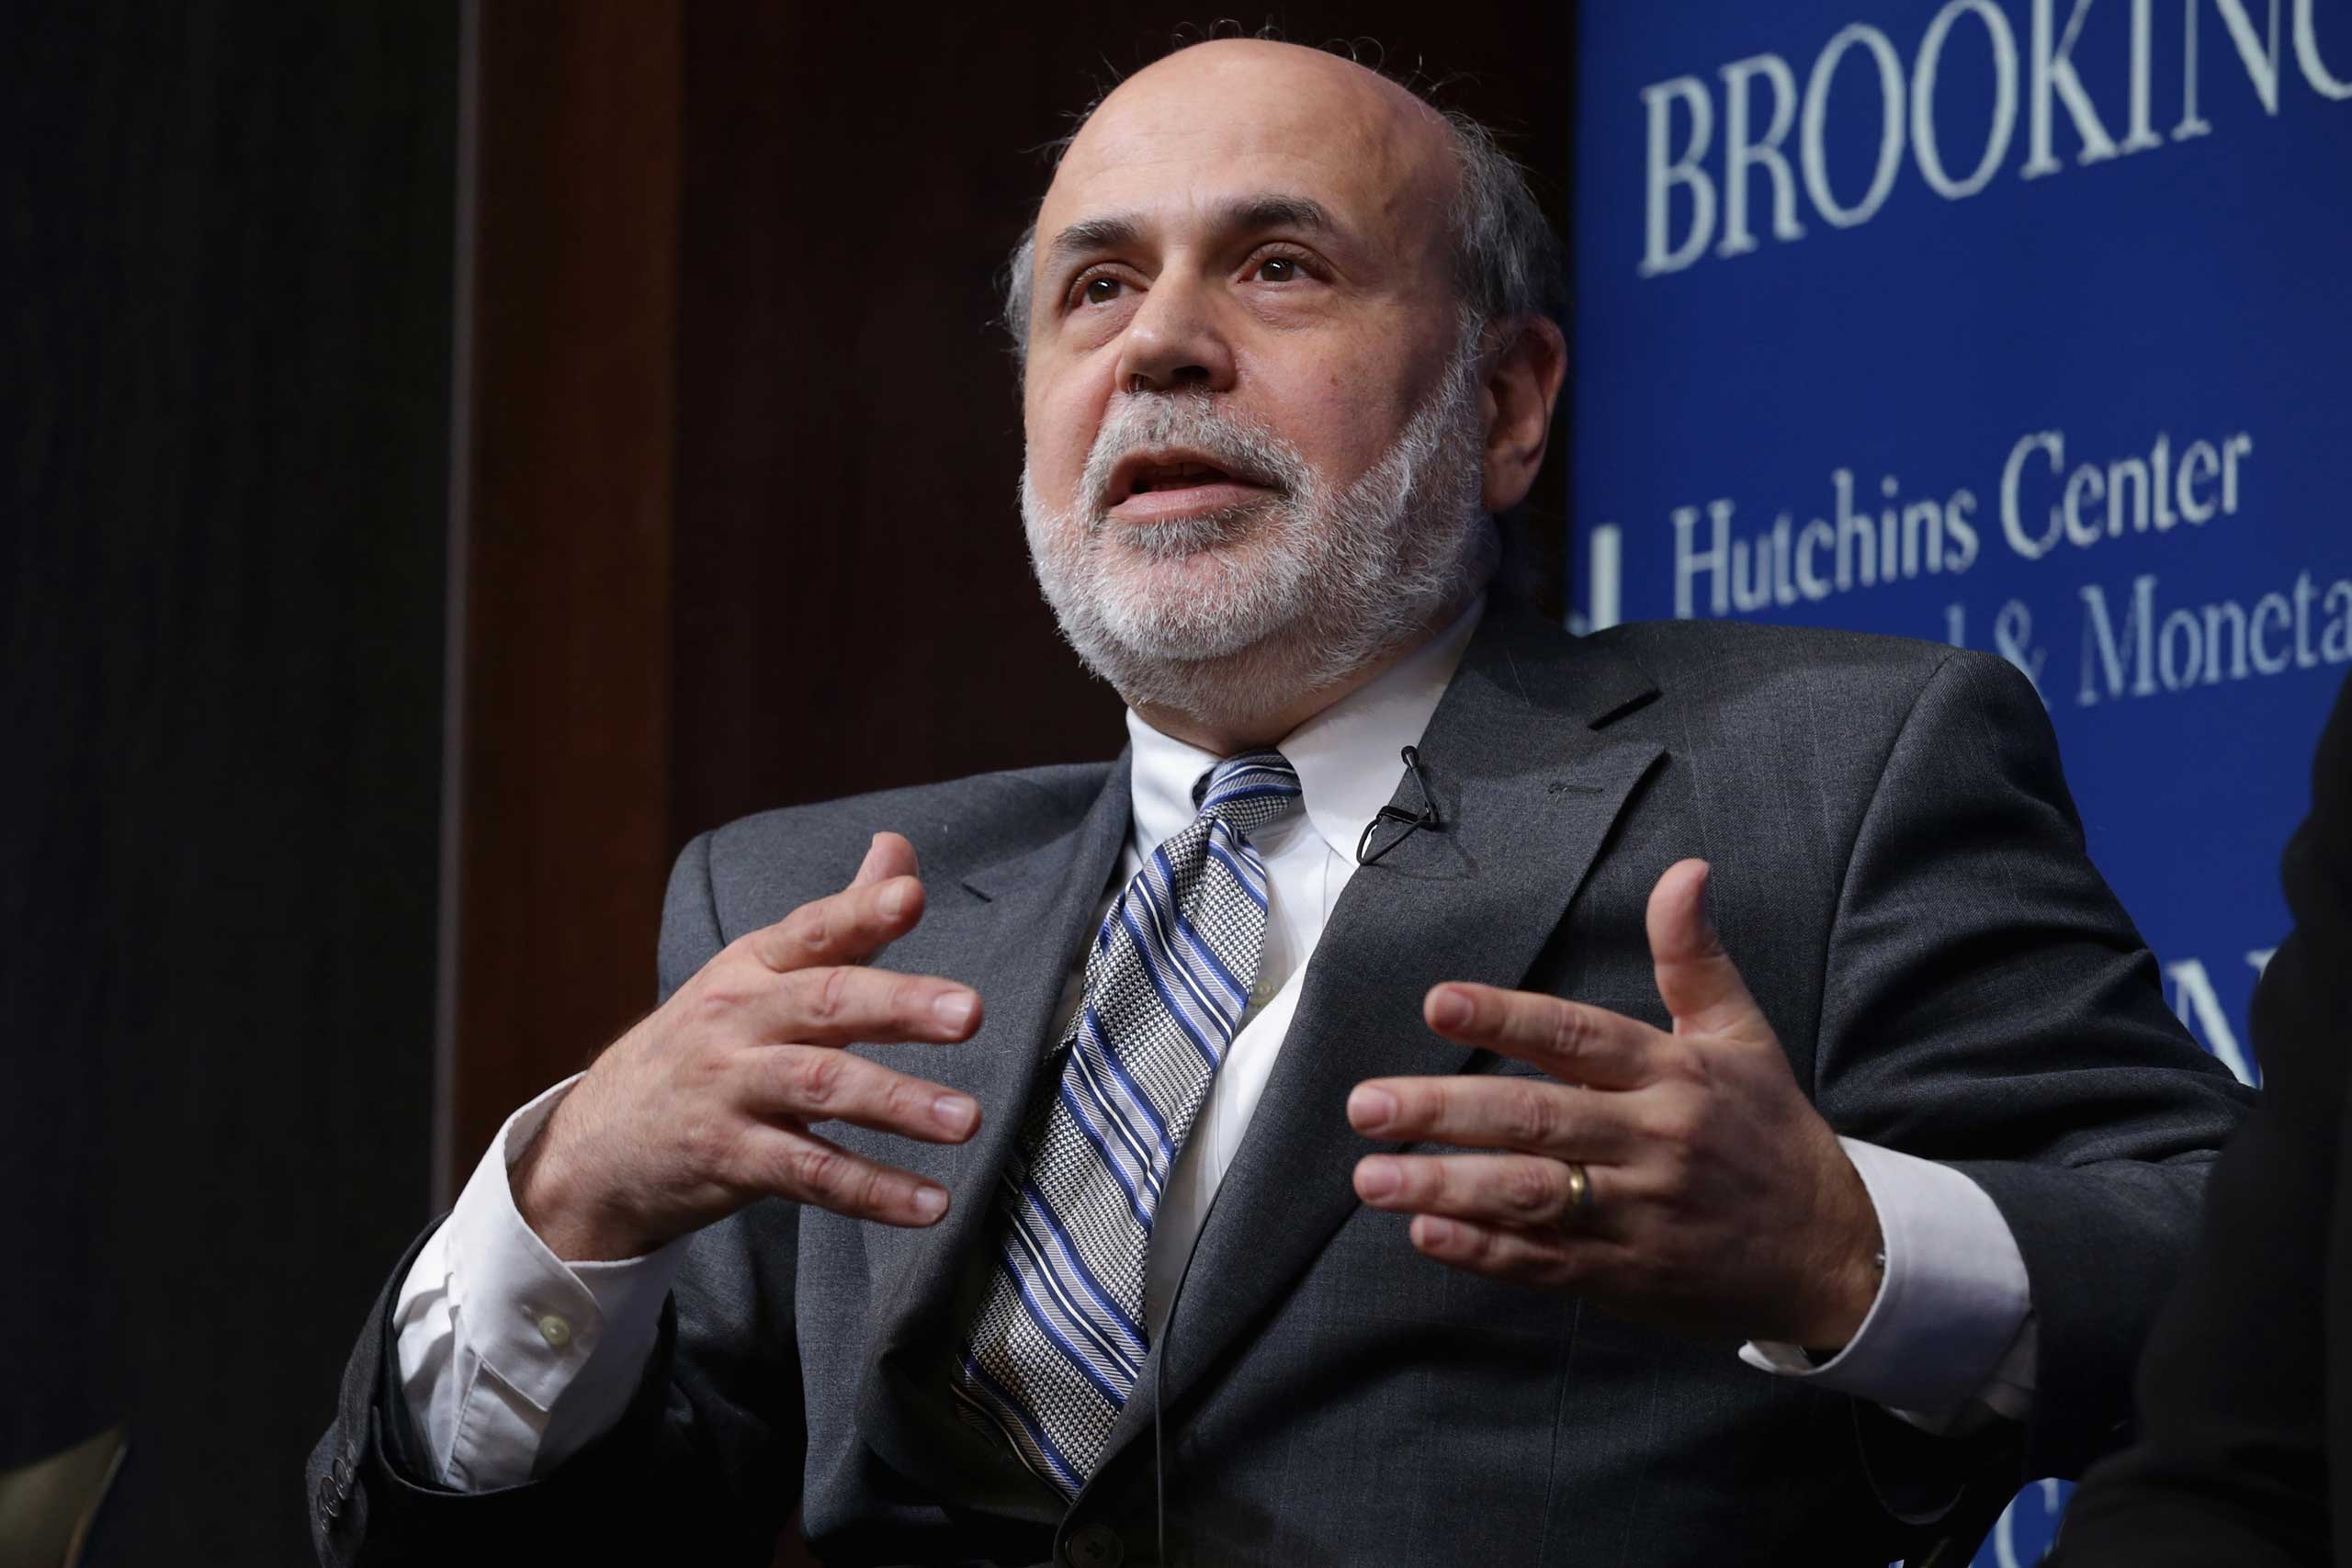 Former Fed Chairman Ben Bernanke participates in a panel discussion at the Brookings Institution in Washington, DC., March 2, 2015. (Chip Somodevilla—Getty Images)